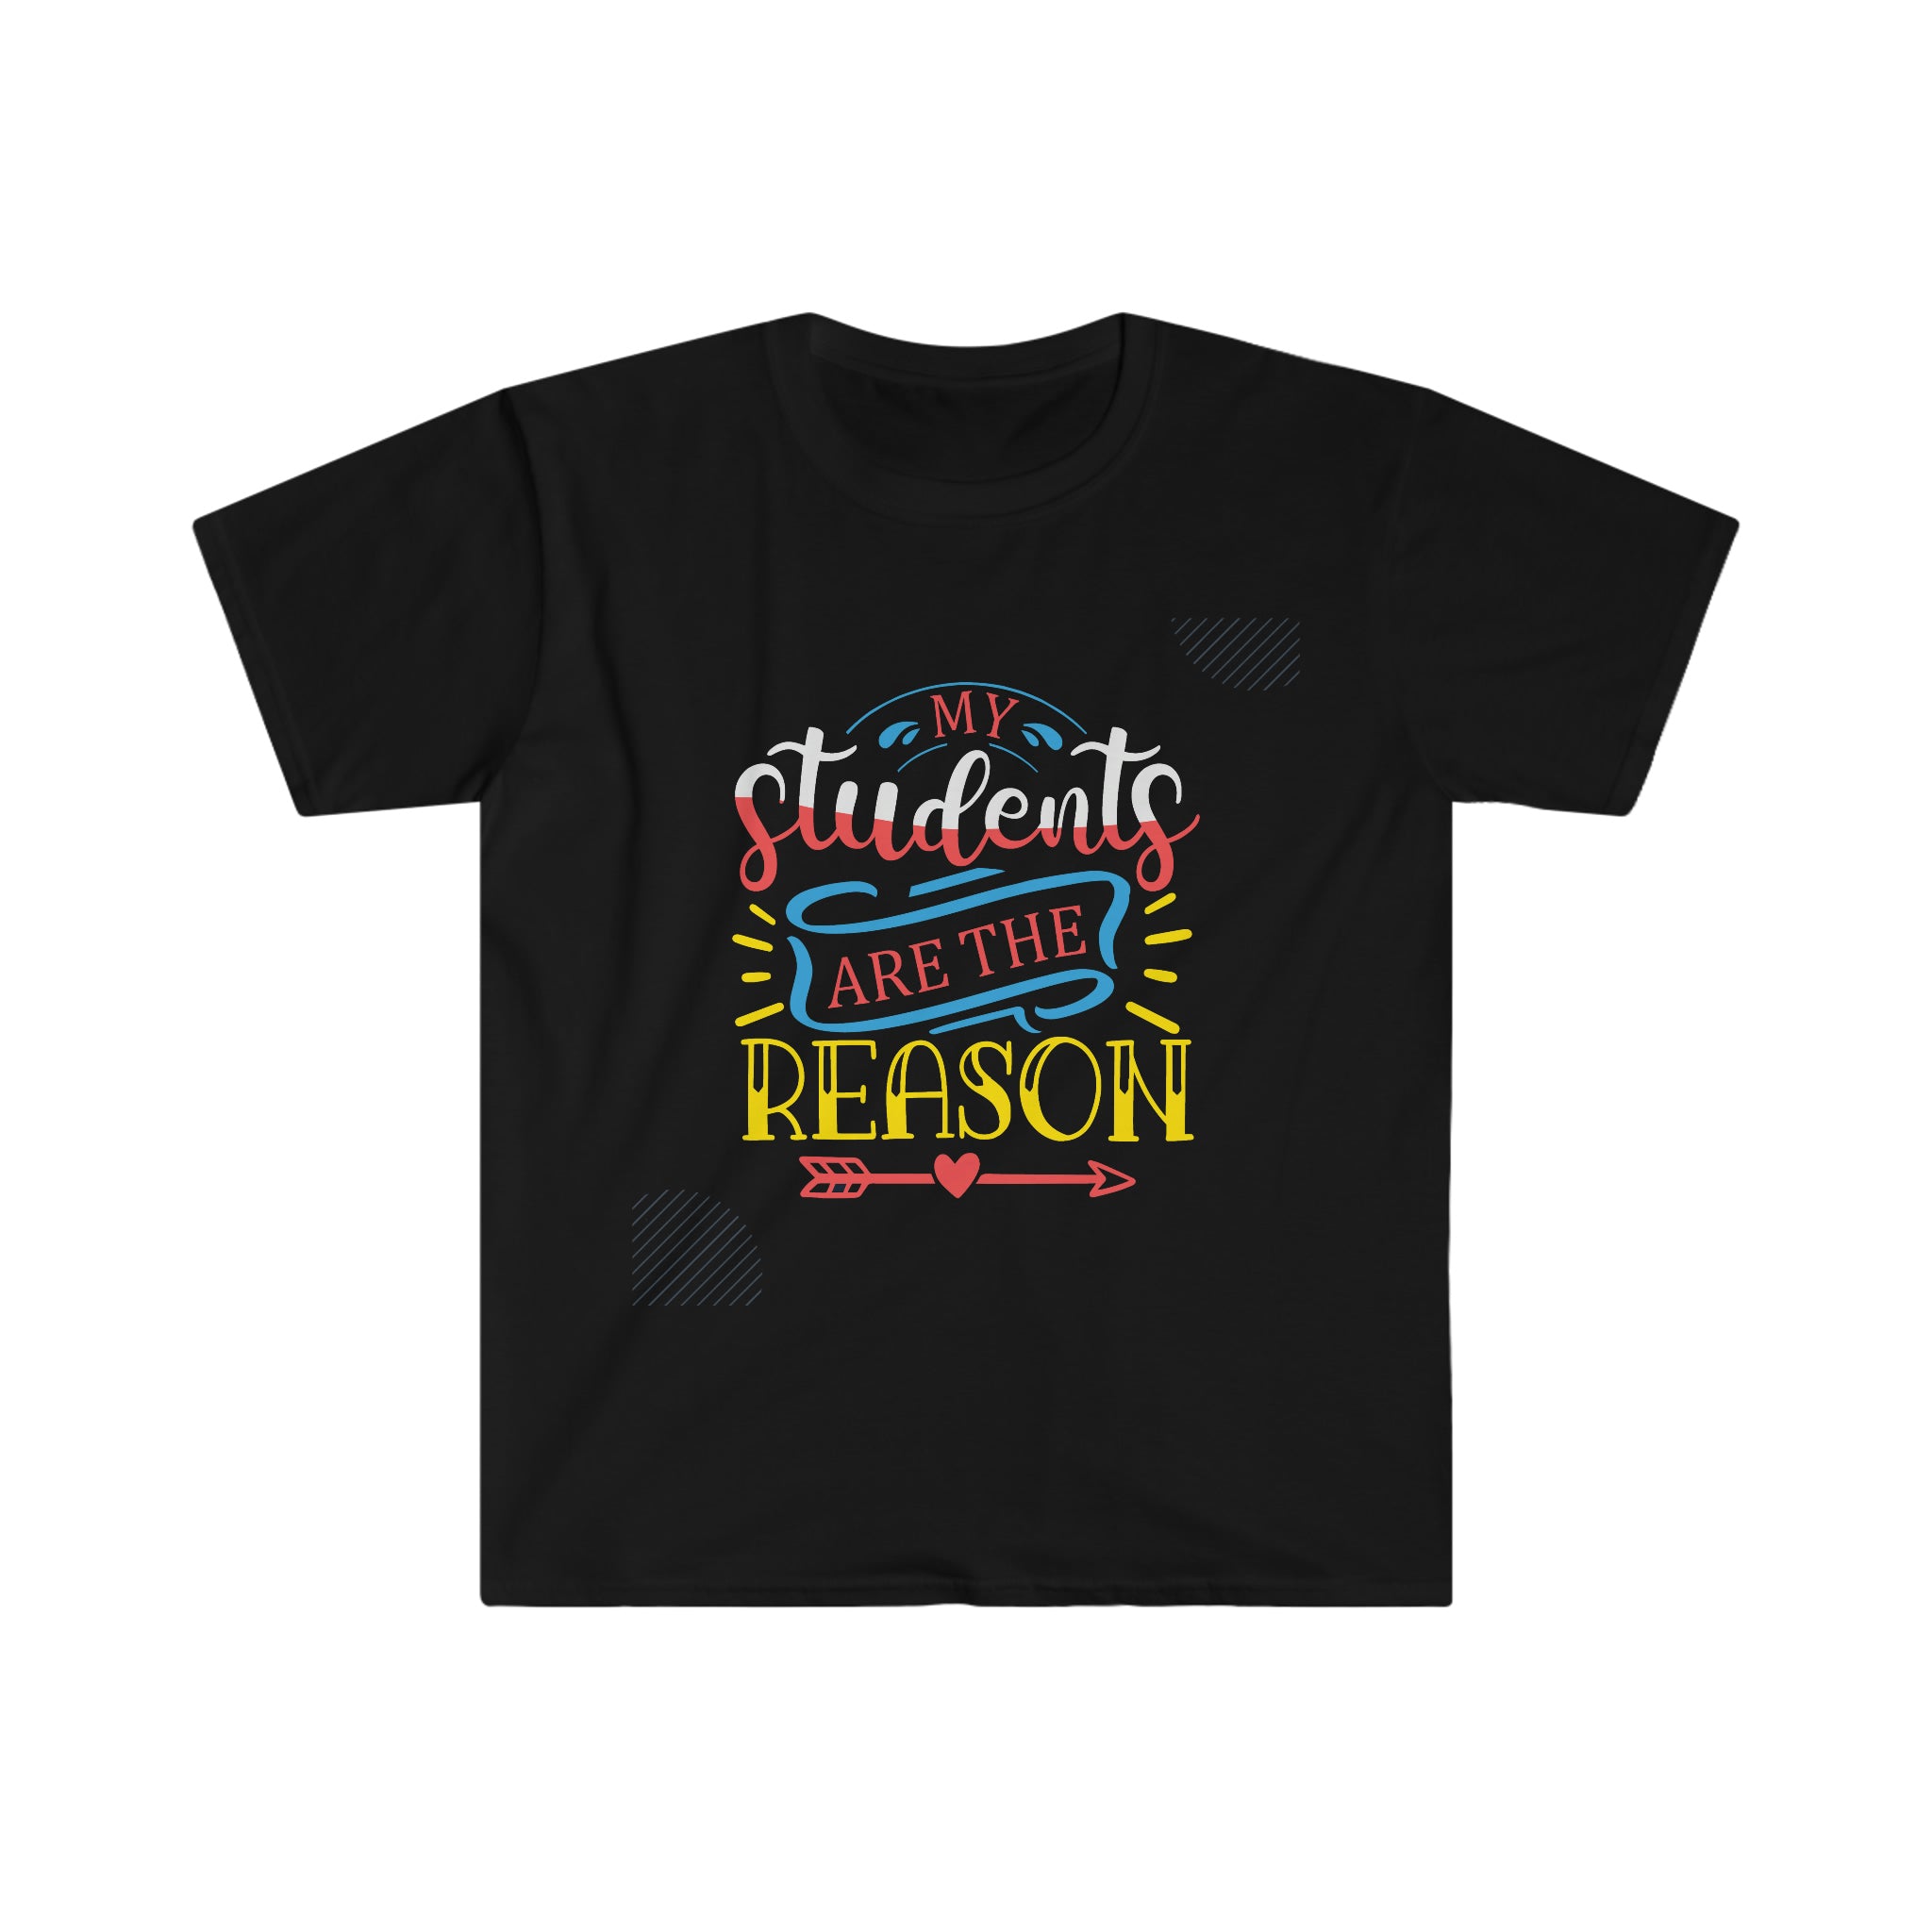 My Students are the Reason T-Shirt